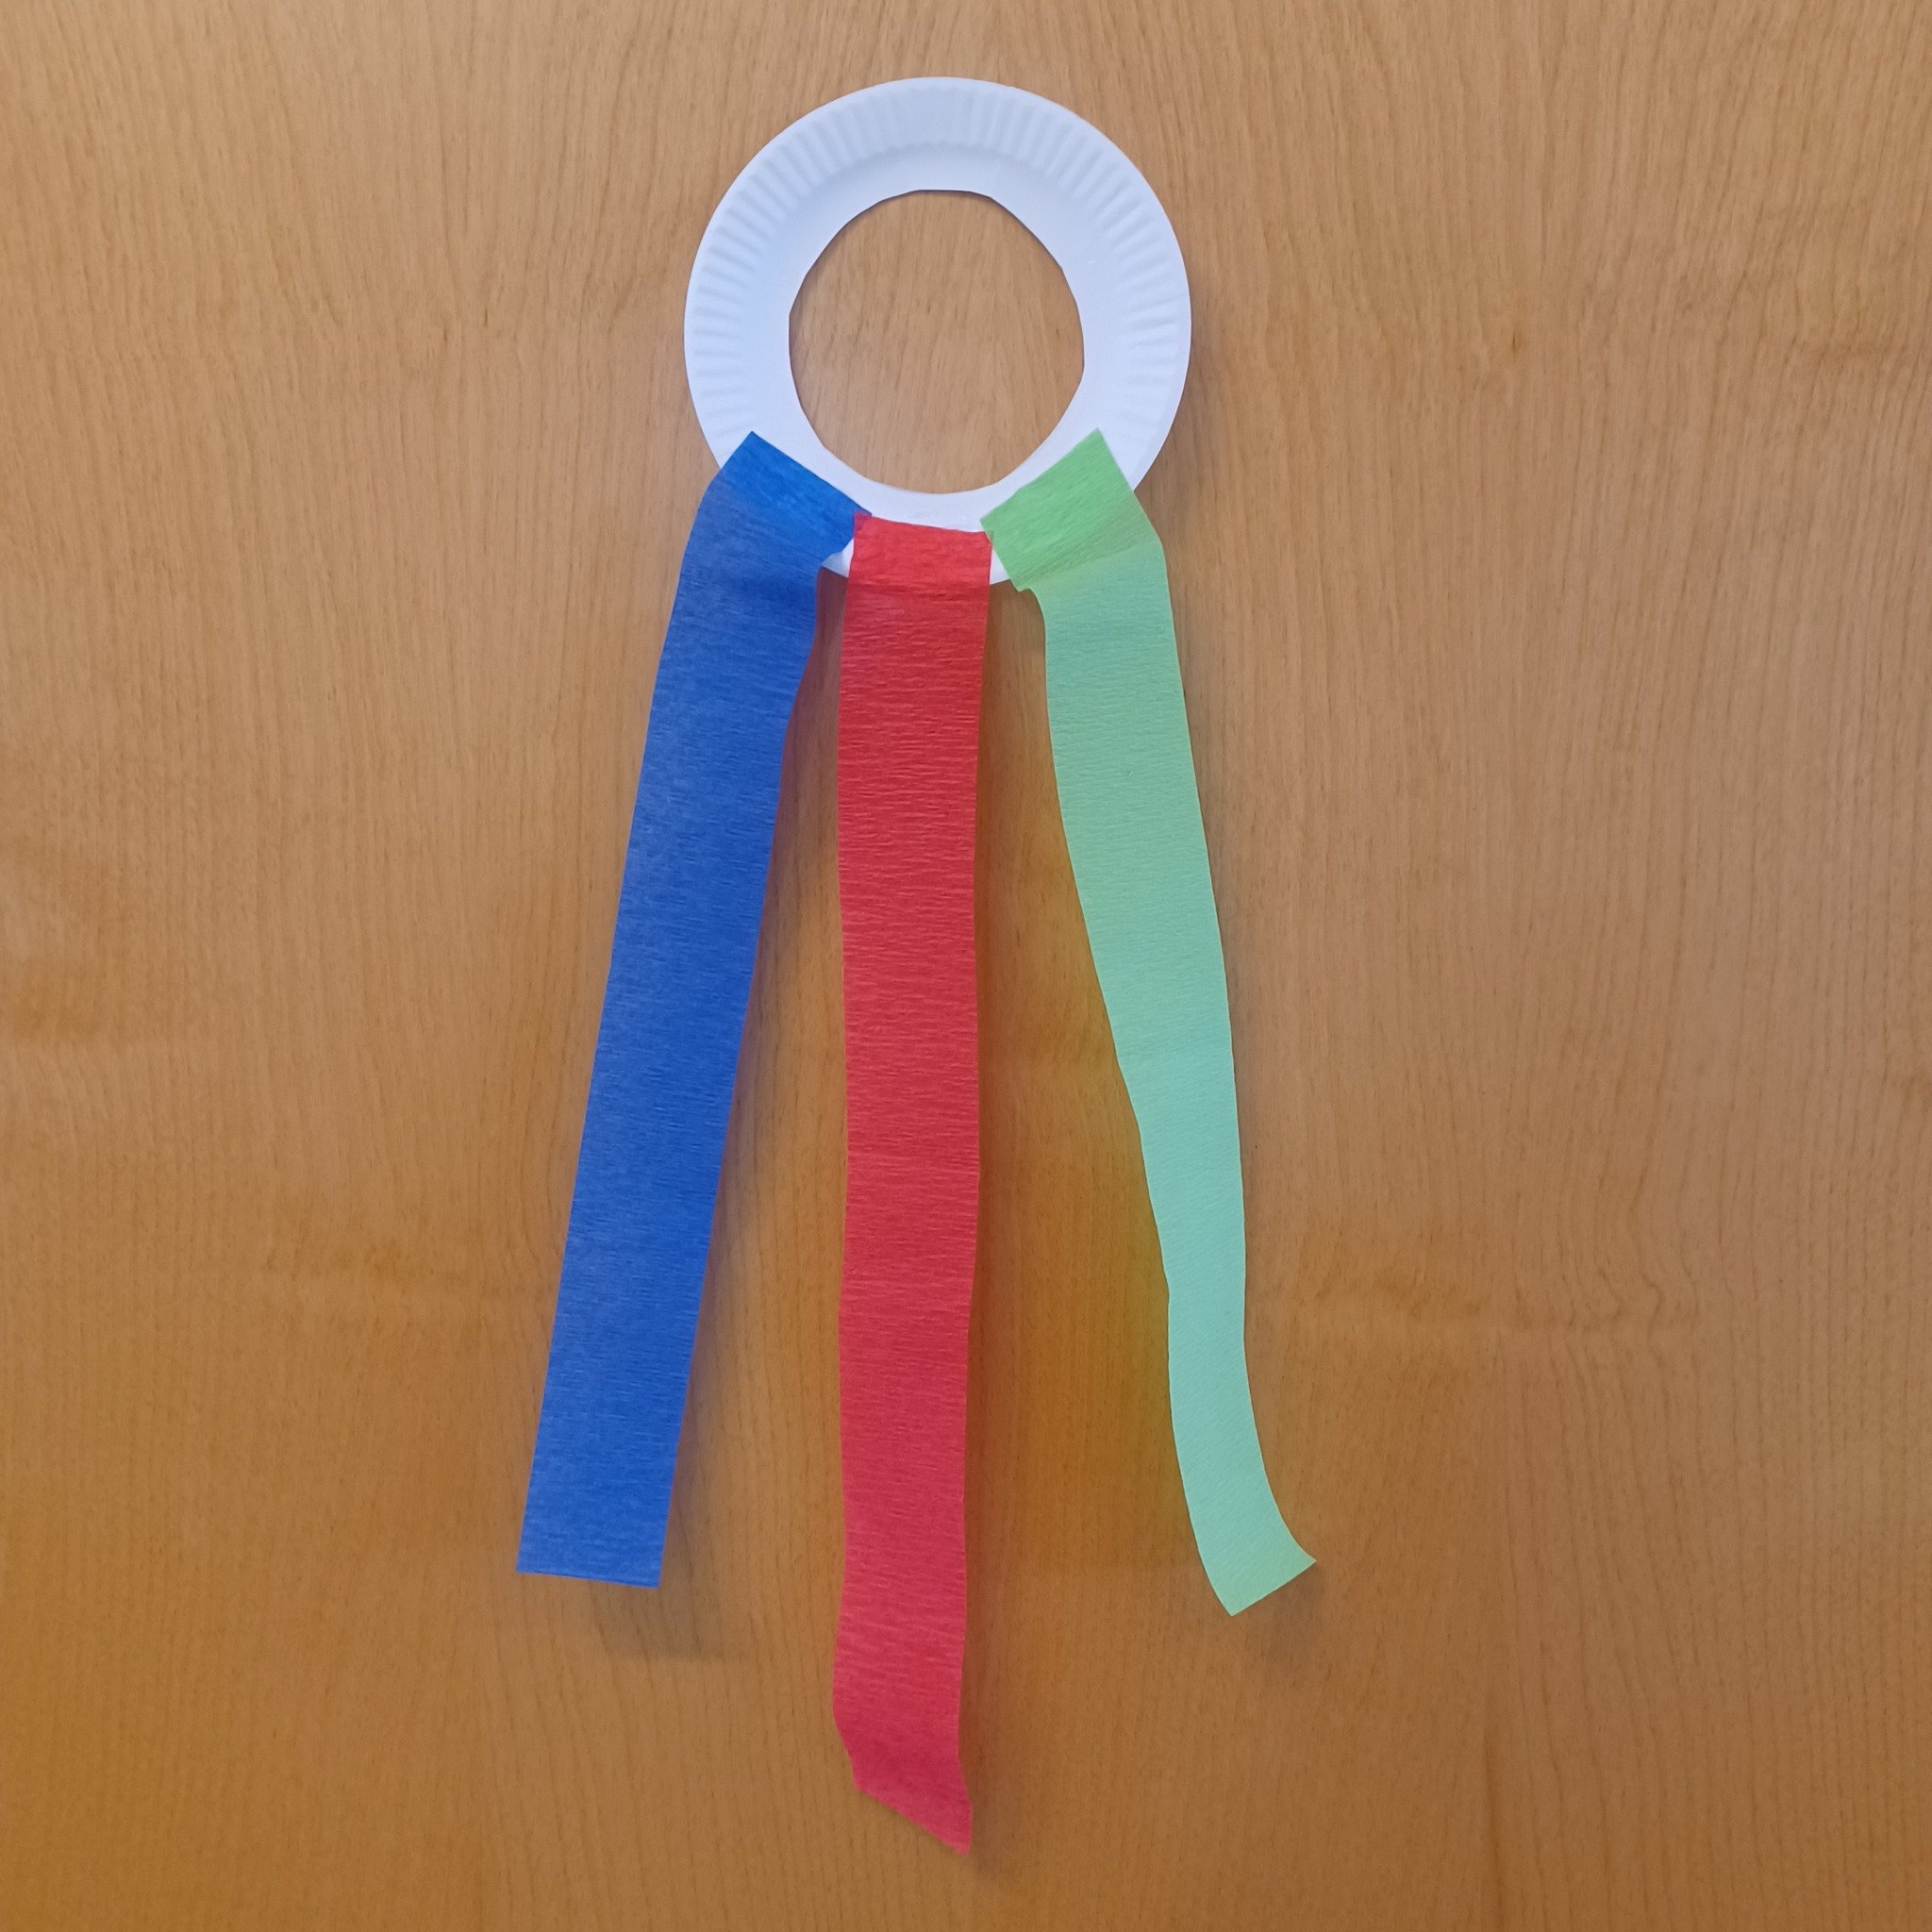 This week we are observing Big Wind Day with this colorful wind sock for Fun Friday. Come make one 10:30am-12pm.